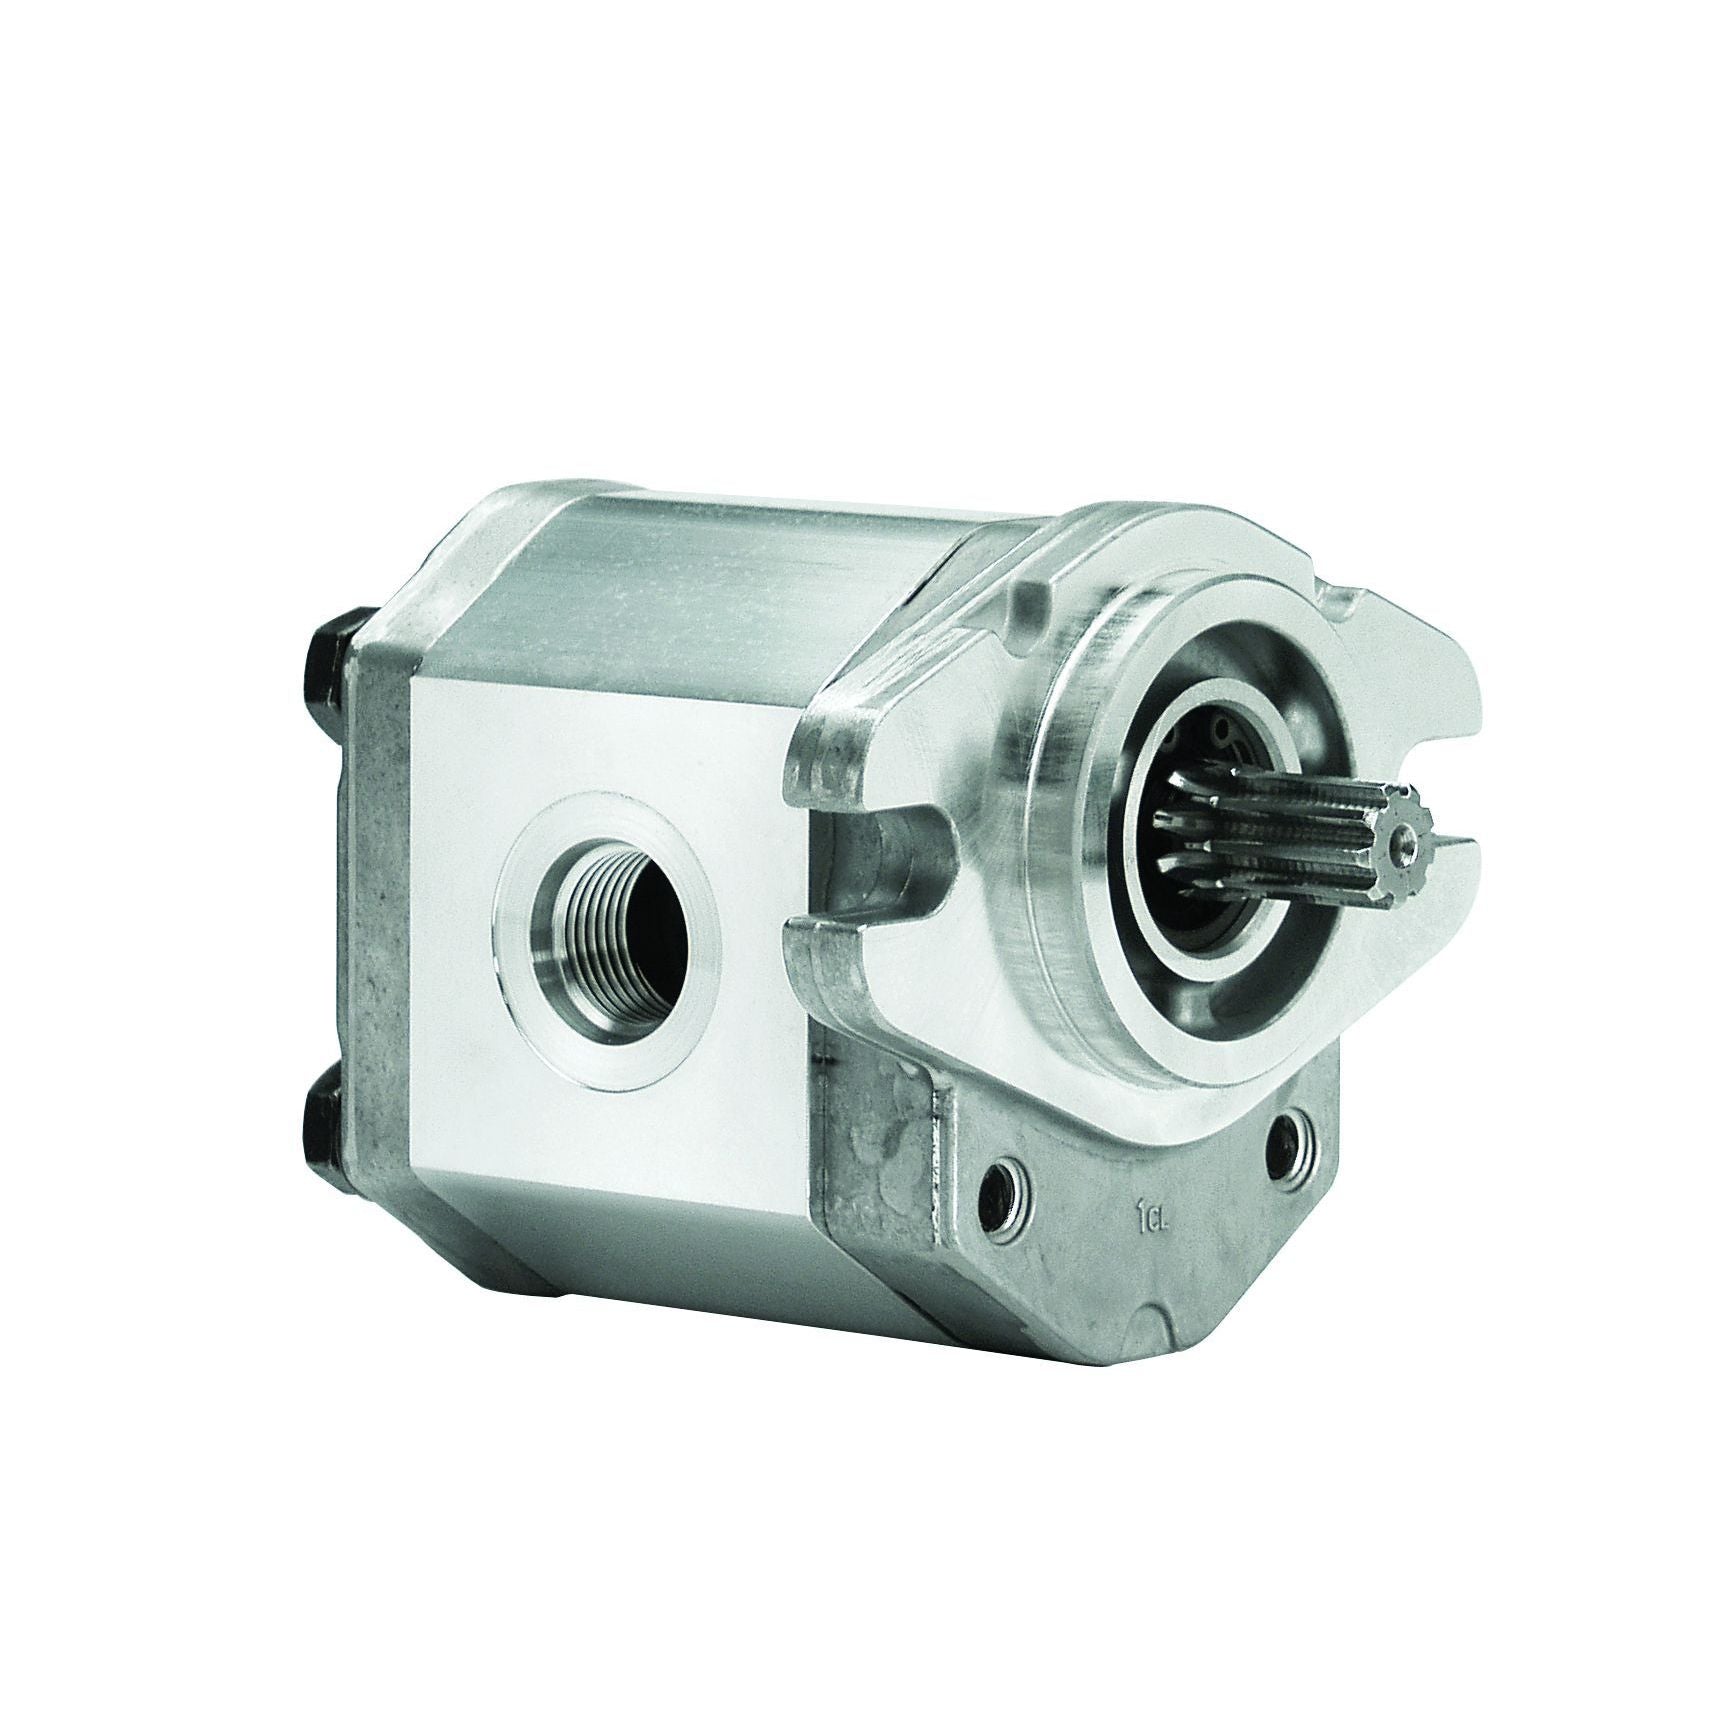 ALP2A-D-6-S1 : Marzocchi Gear Pump, CW, 4.5cc (0.2745in3), 2.14 GPM, 3625psi, 4000 RPM, #12 SAE (3/4") In, #10 SAE (5/8") Out, Splined Shaft 9T 16/32DP, SAE A 2-Bolt Mount